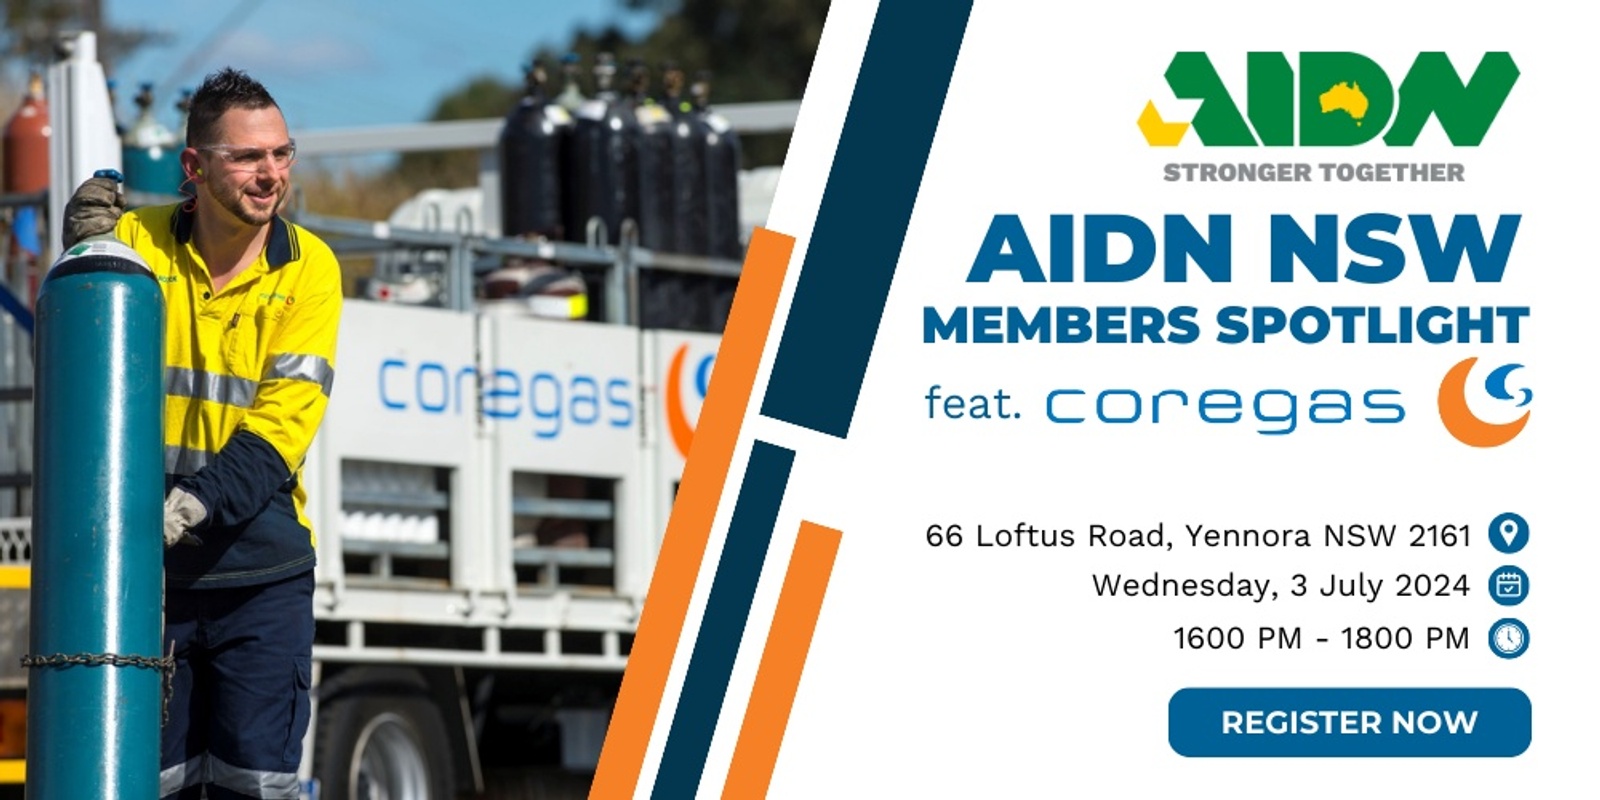 Banner image for AIDN NSW Networking Event hosted by Coregas